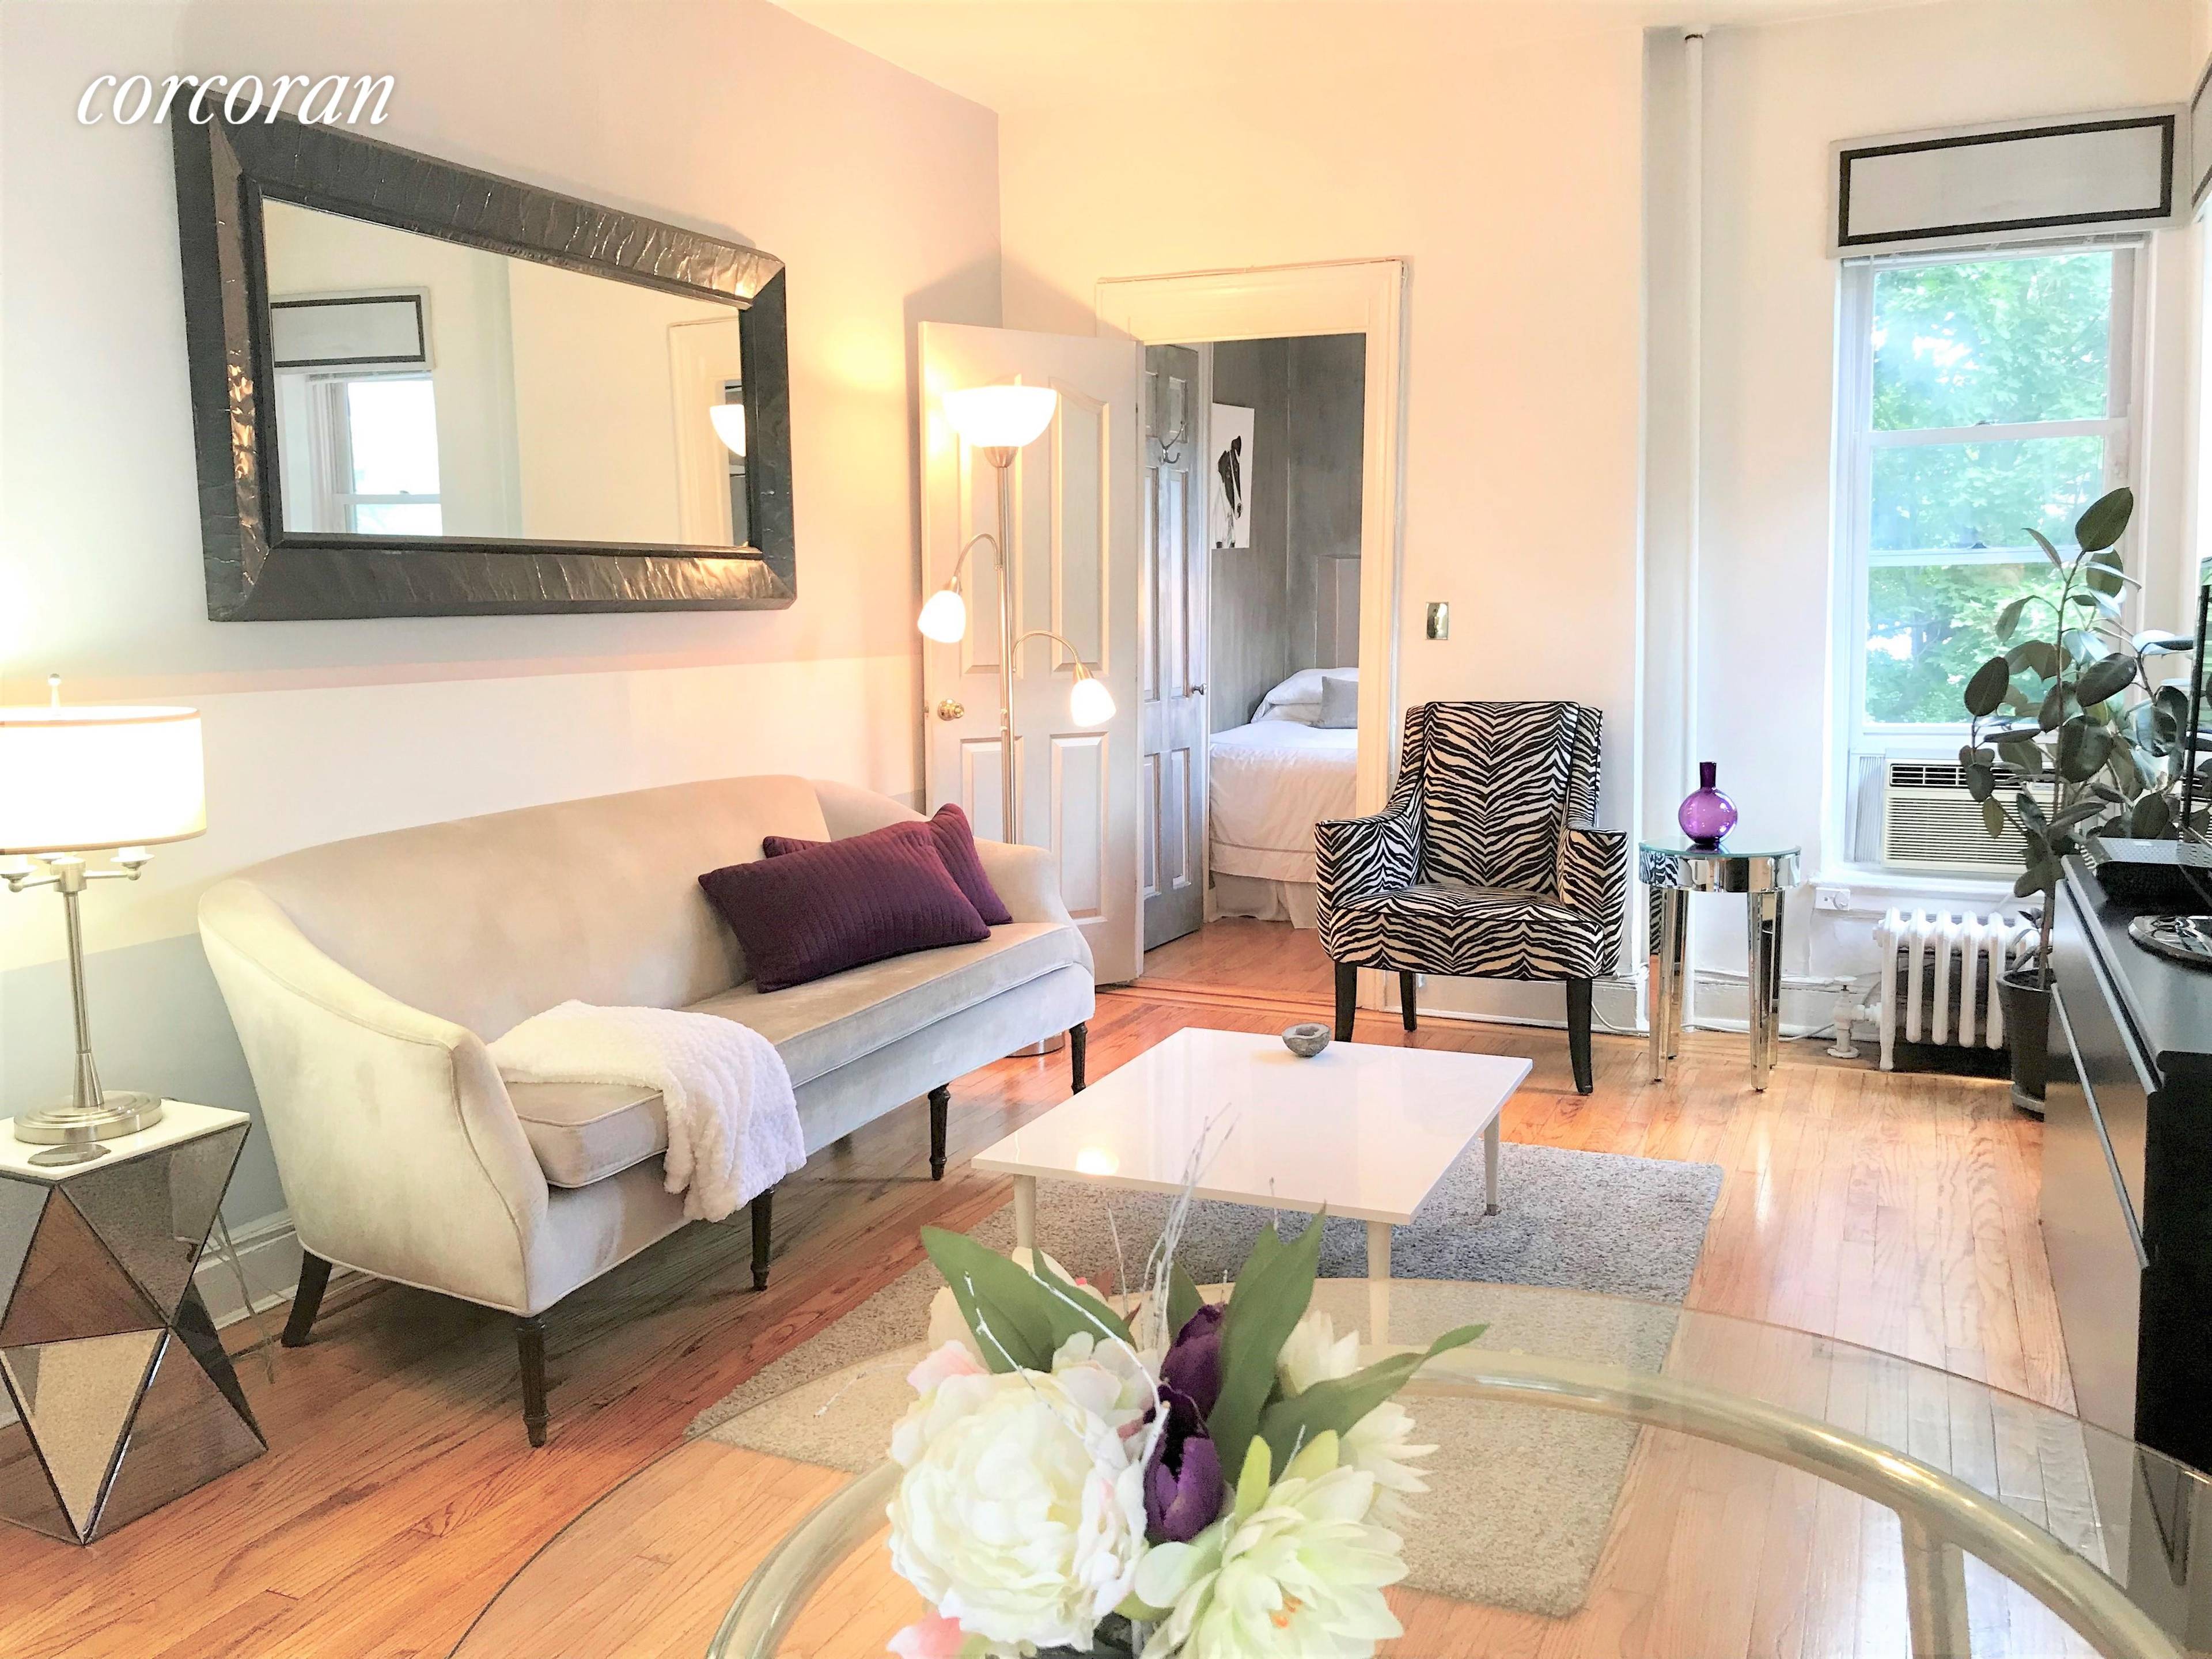 GET READY TO FALL IN LOVE with this modern and elegant 2 Bedroom luxury FURNISHED apartment in the heart of Brooklyn Heights' historic neighborhood.